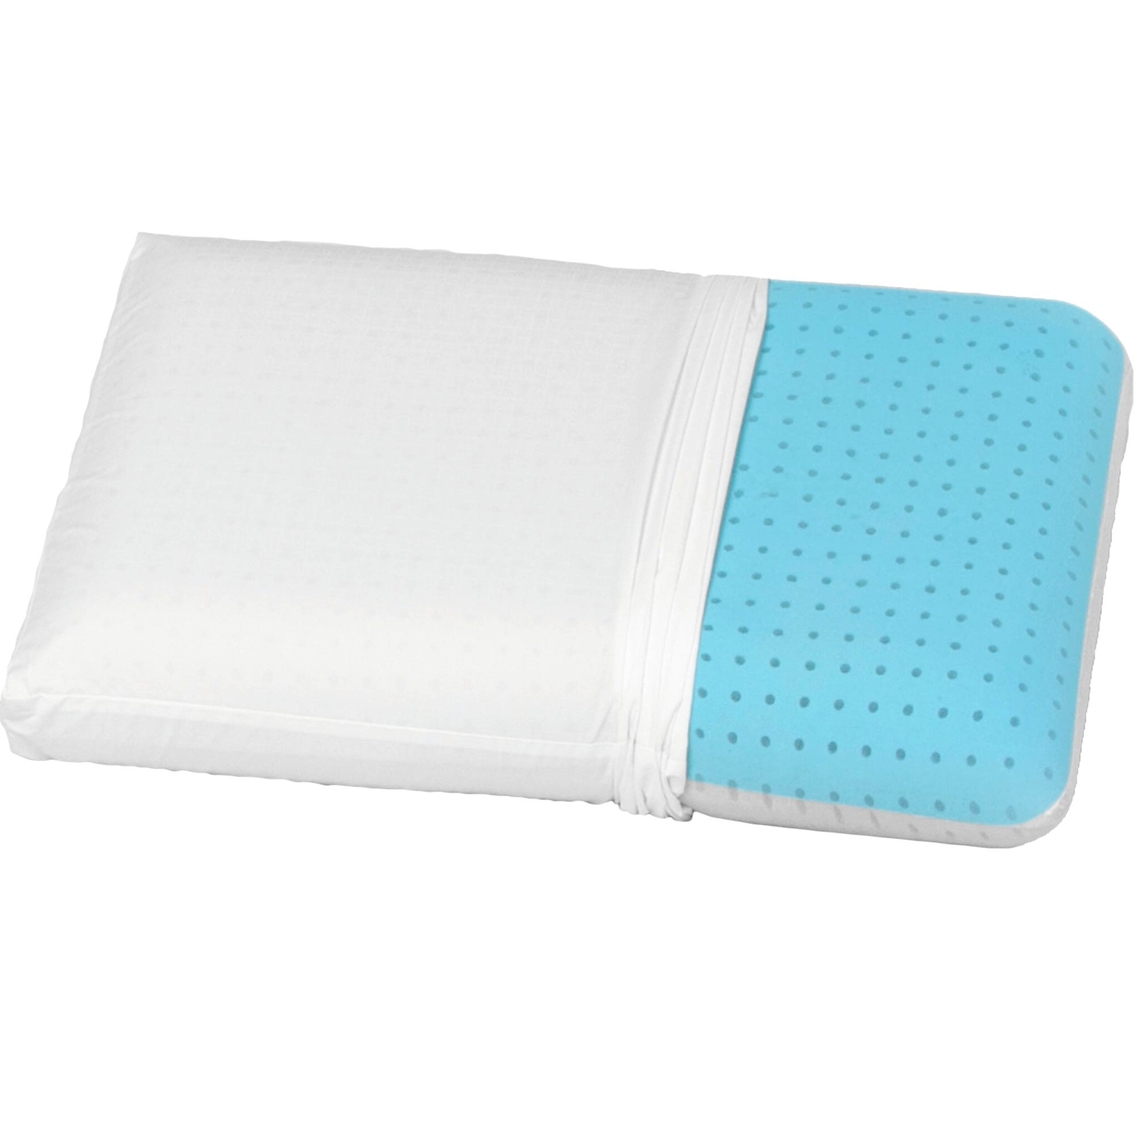 Beautyrest Thermaphase Gel Memory Foam Pillow with Hydrogel Technology - Image 2 of 4